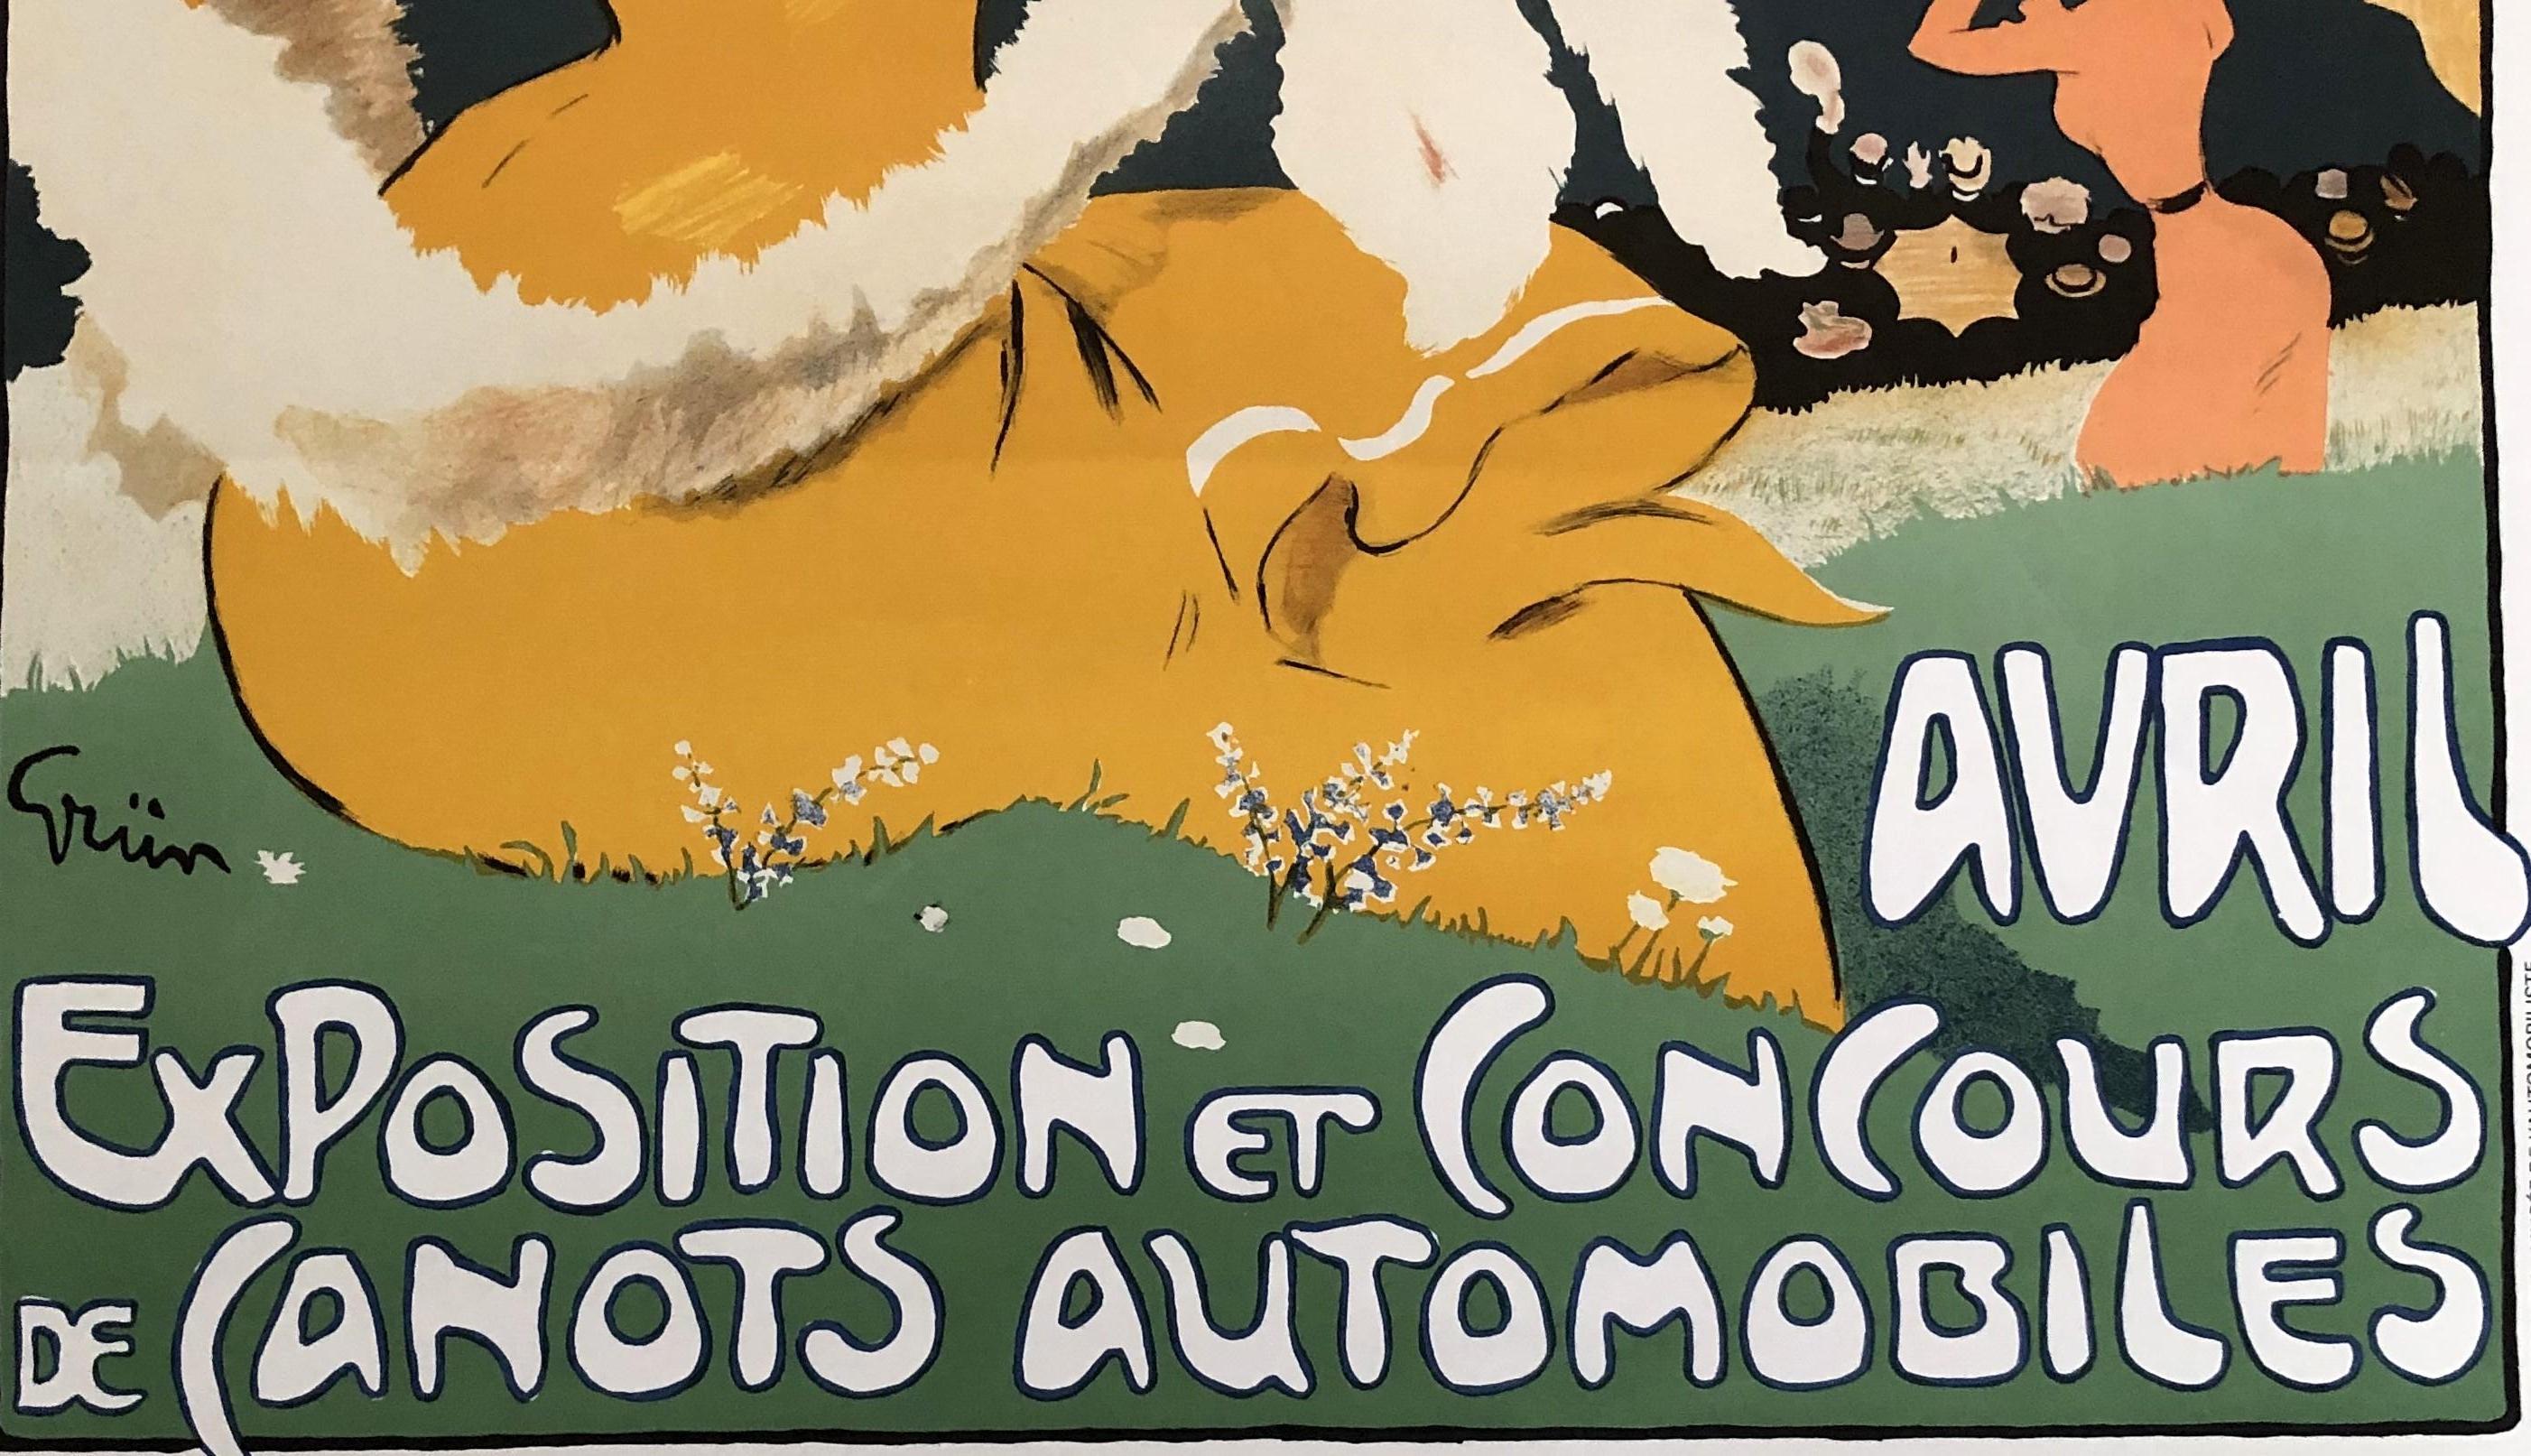 Monaco Exposition And Concours Automobiles – Lithographieplakat, signiert im Angebot 2